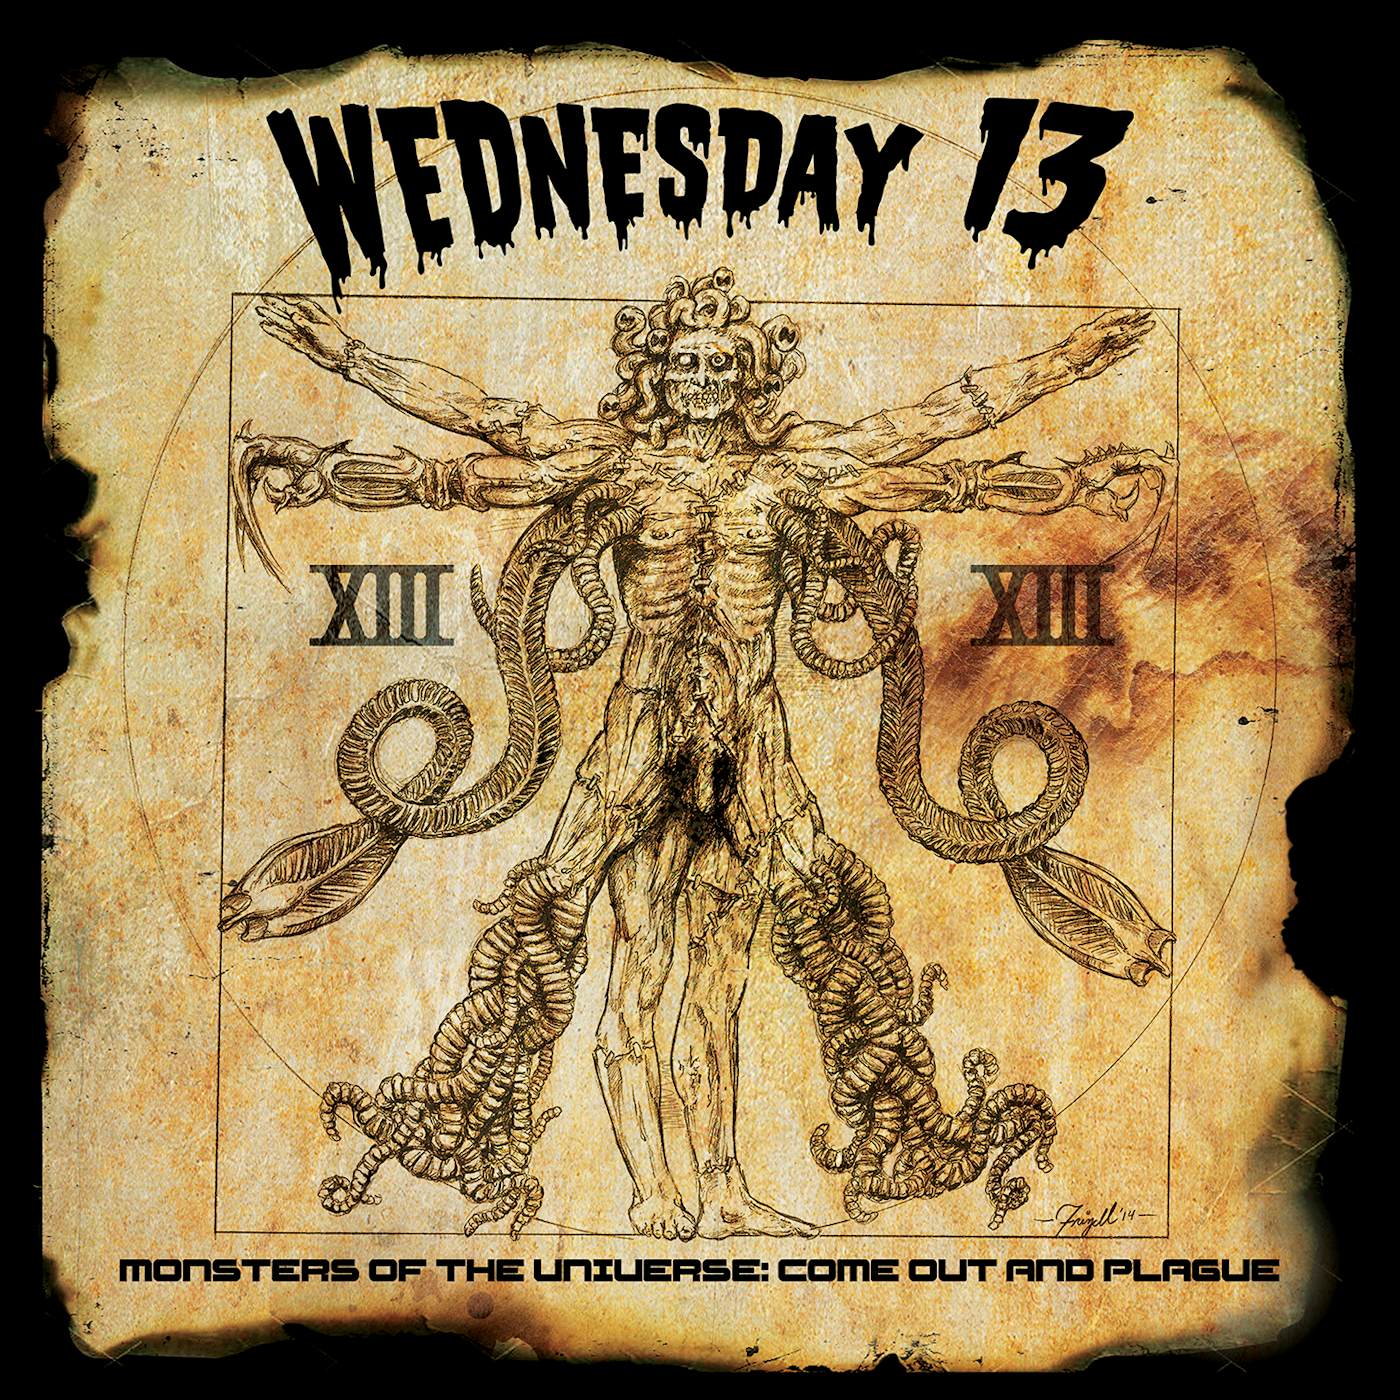 Wednesday 13 Monsters of the Universe: Come Out and Plague Vinyl Record